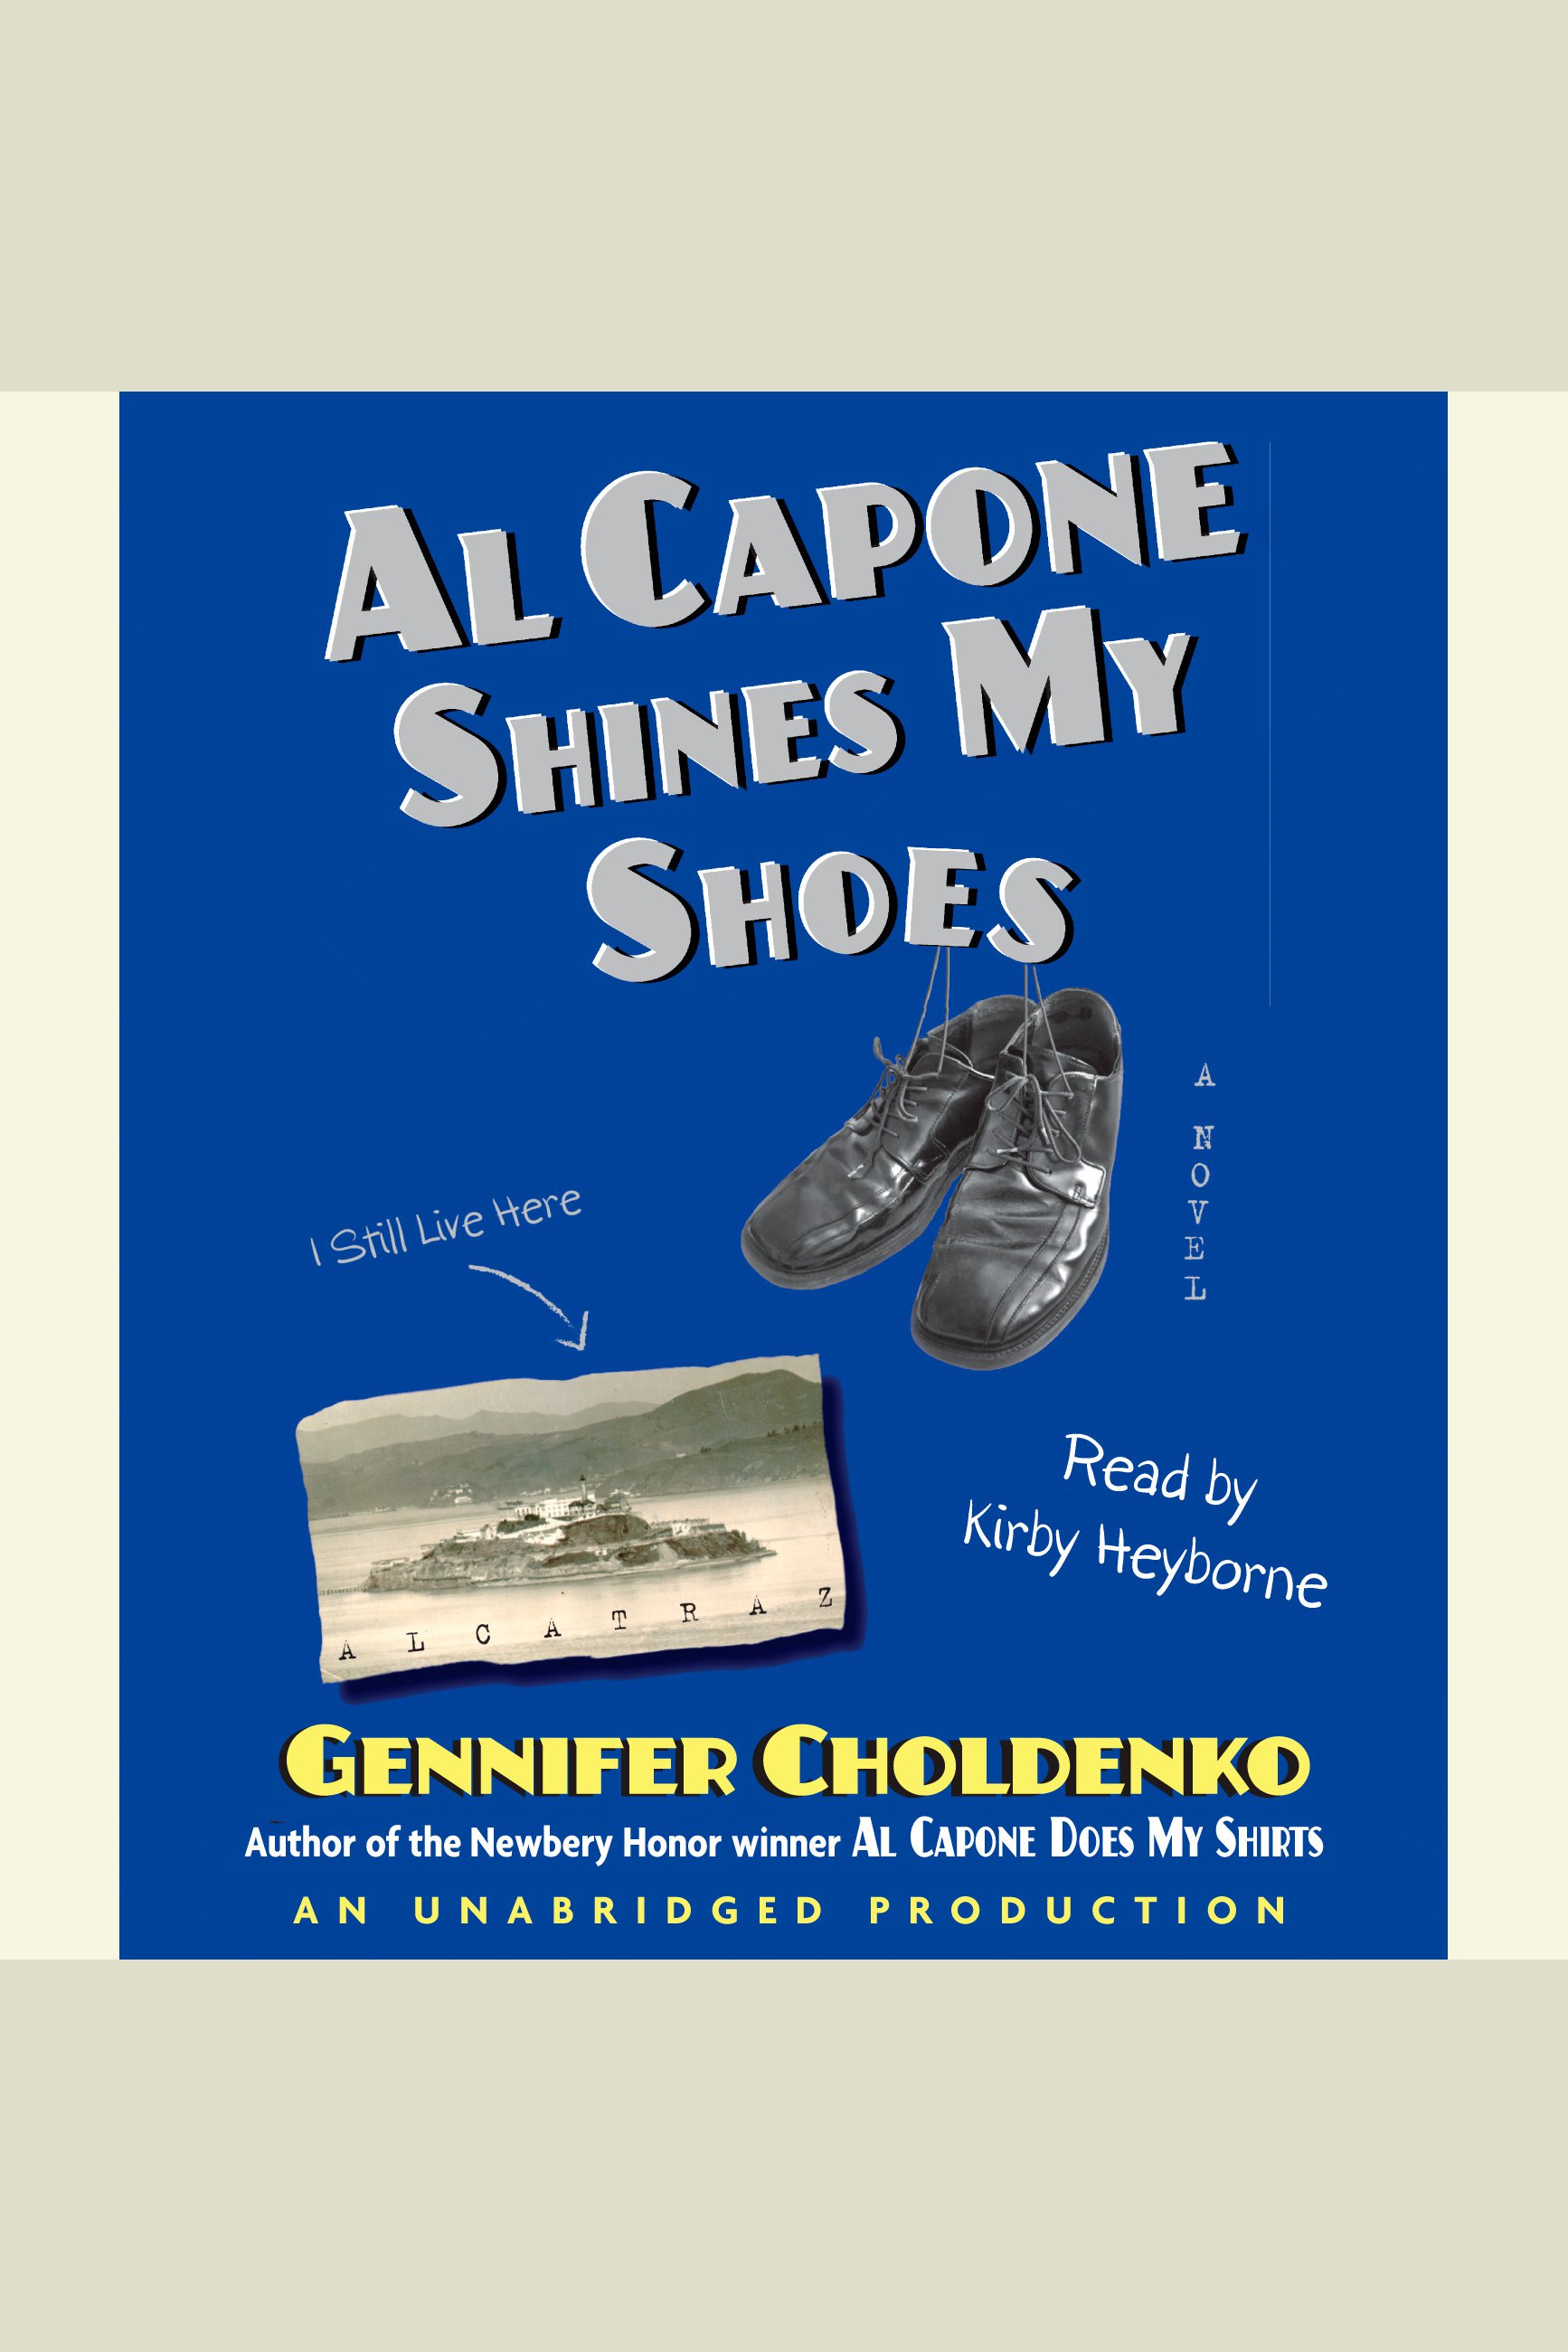 Al Capone shines my shoes cover image